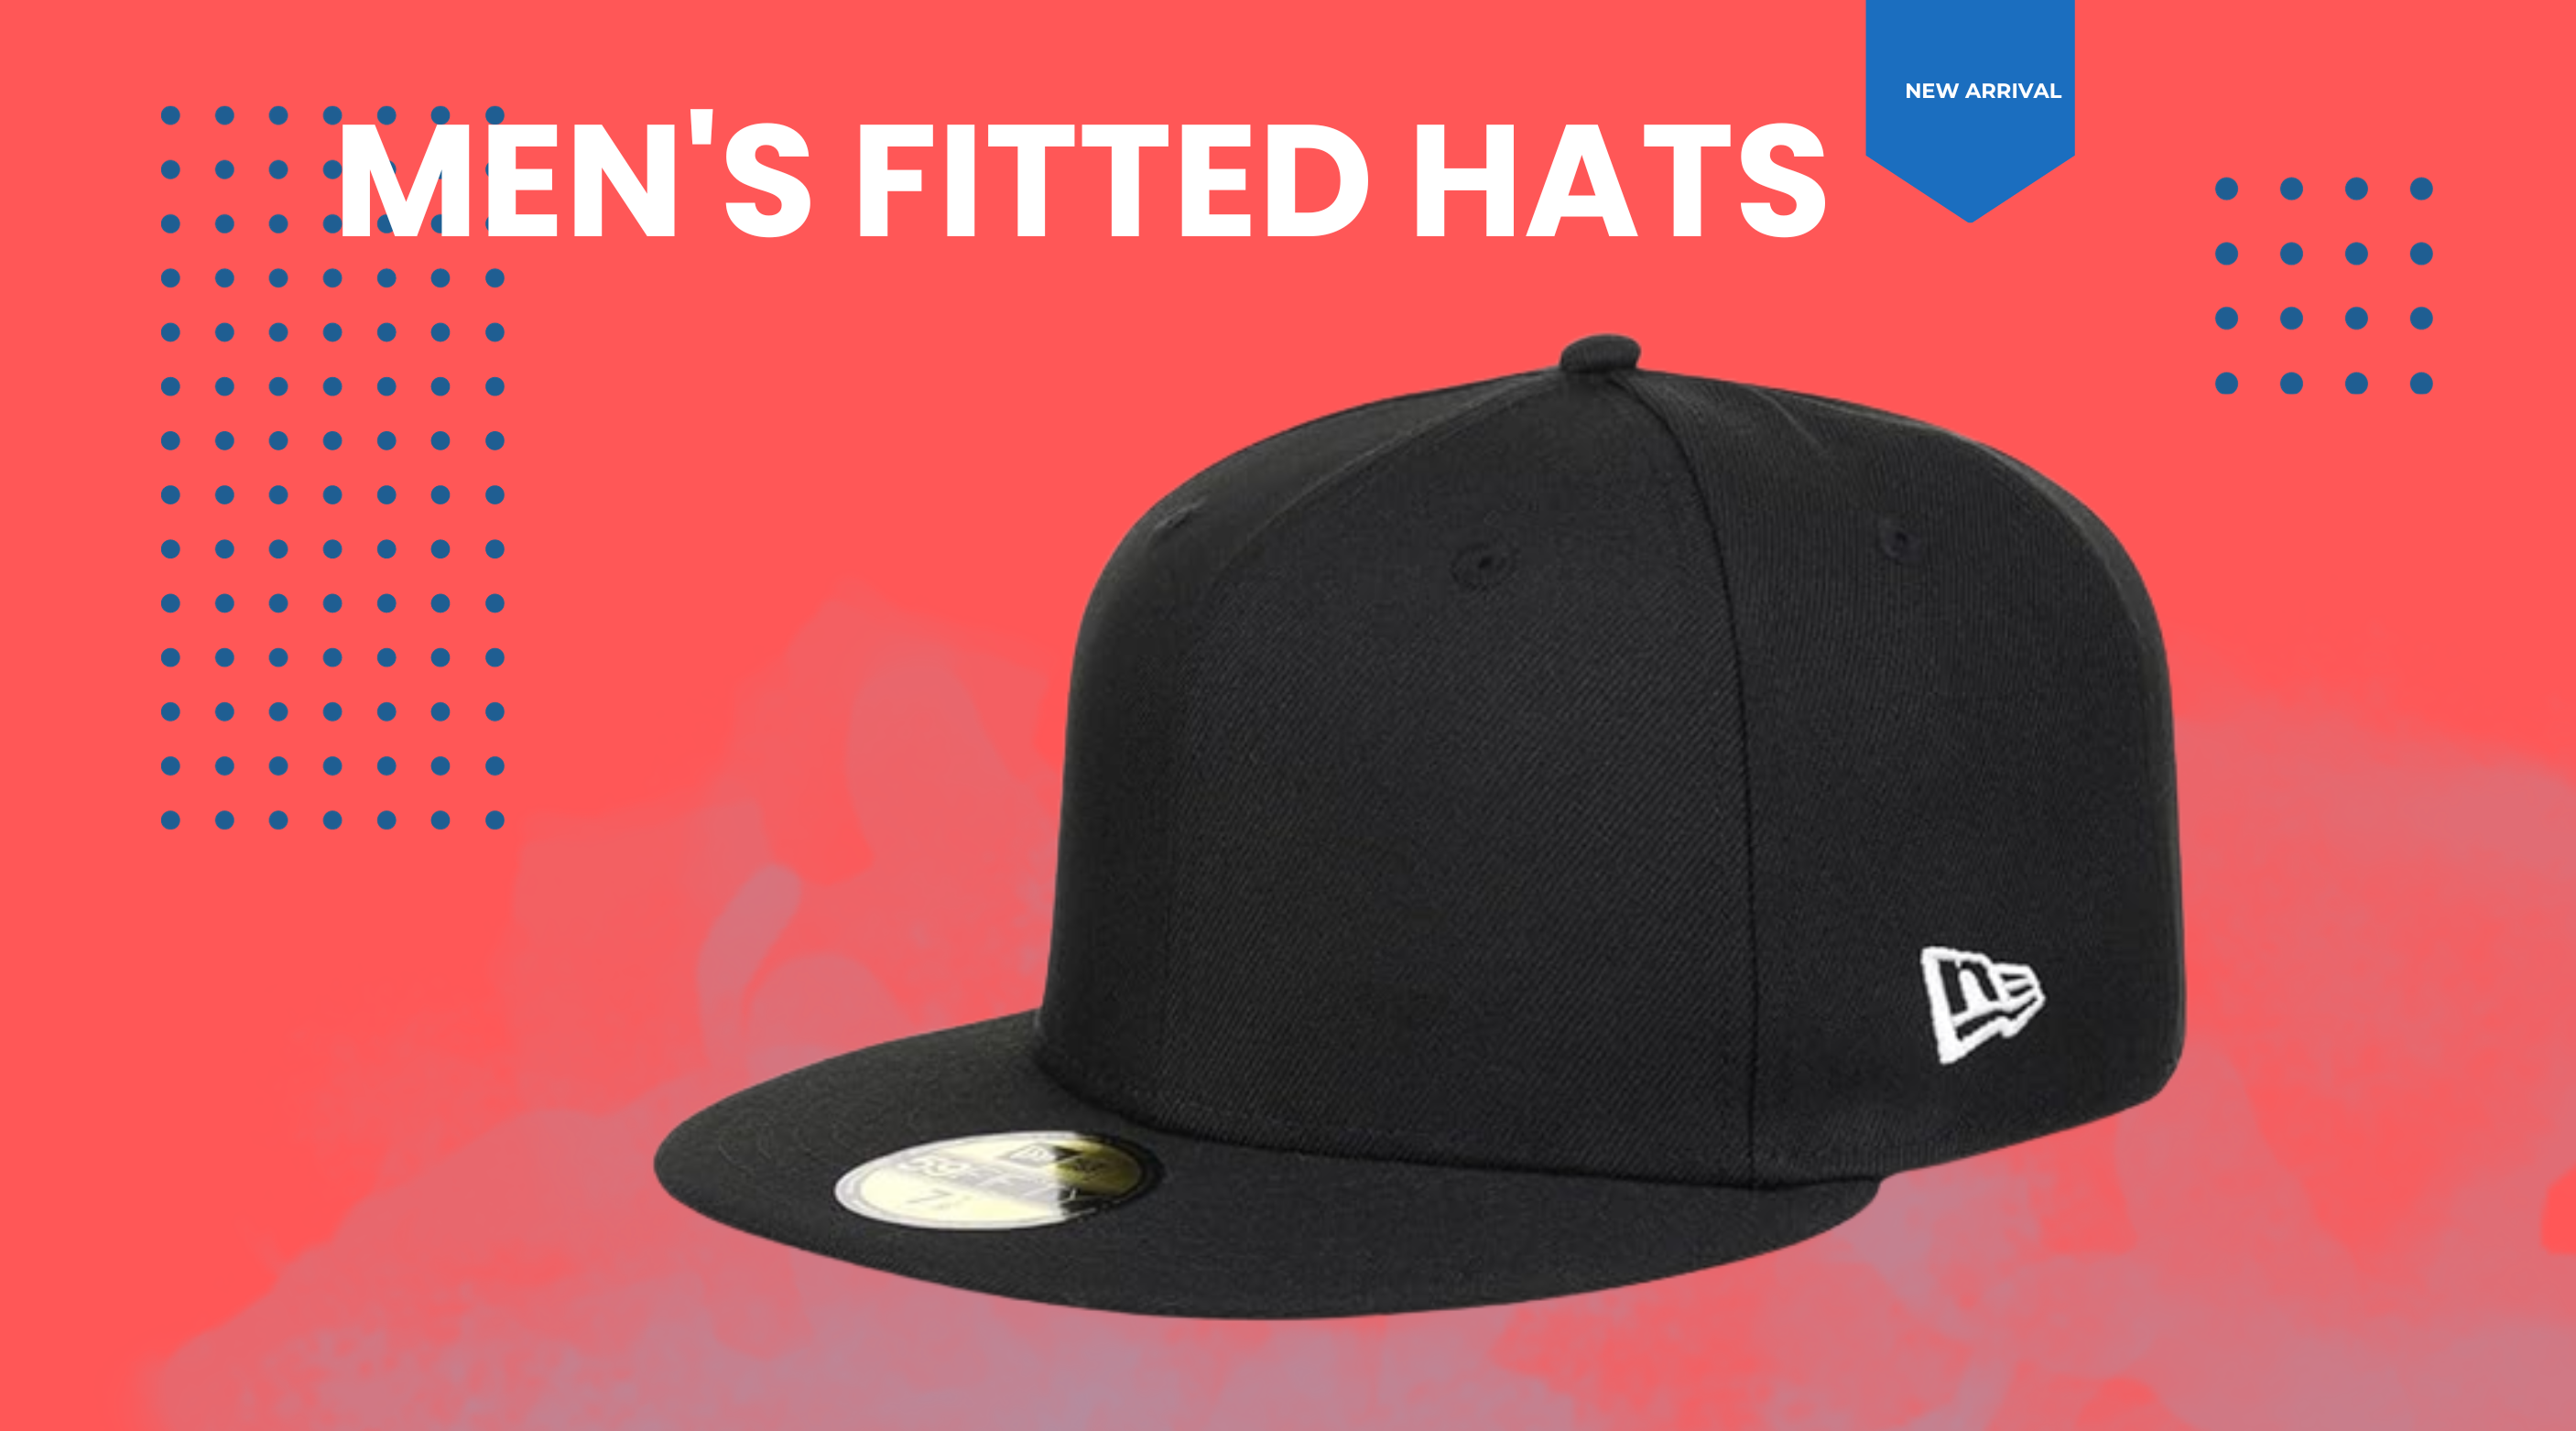 Men's Fitted Hats